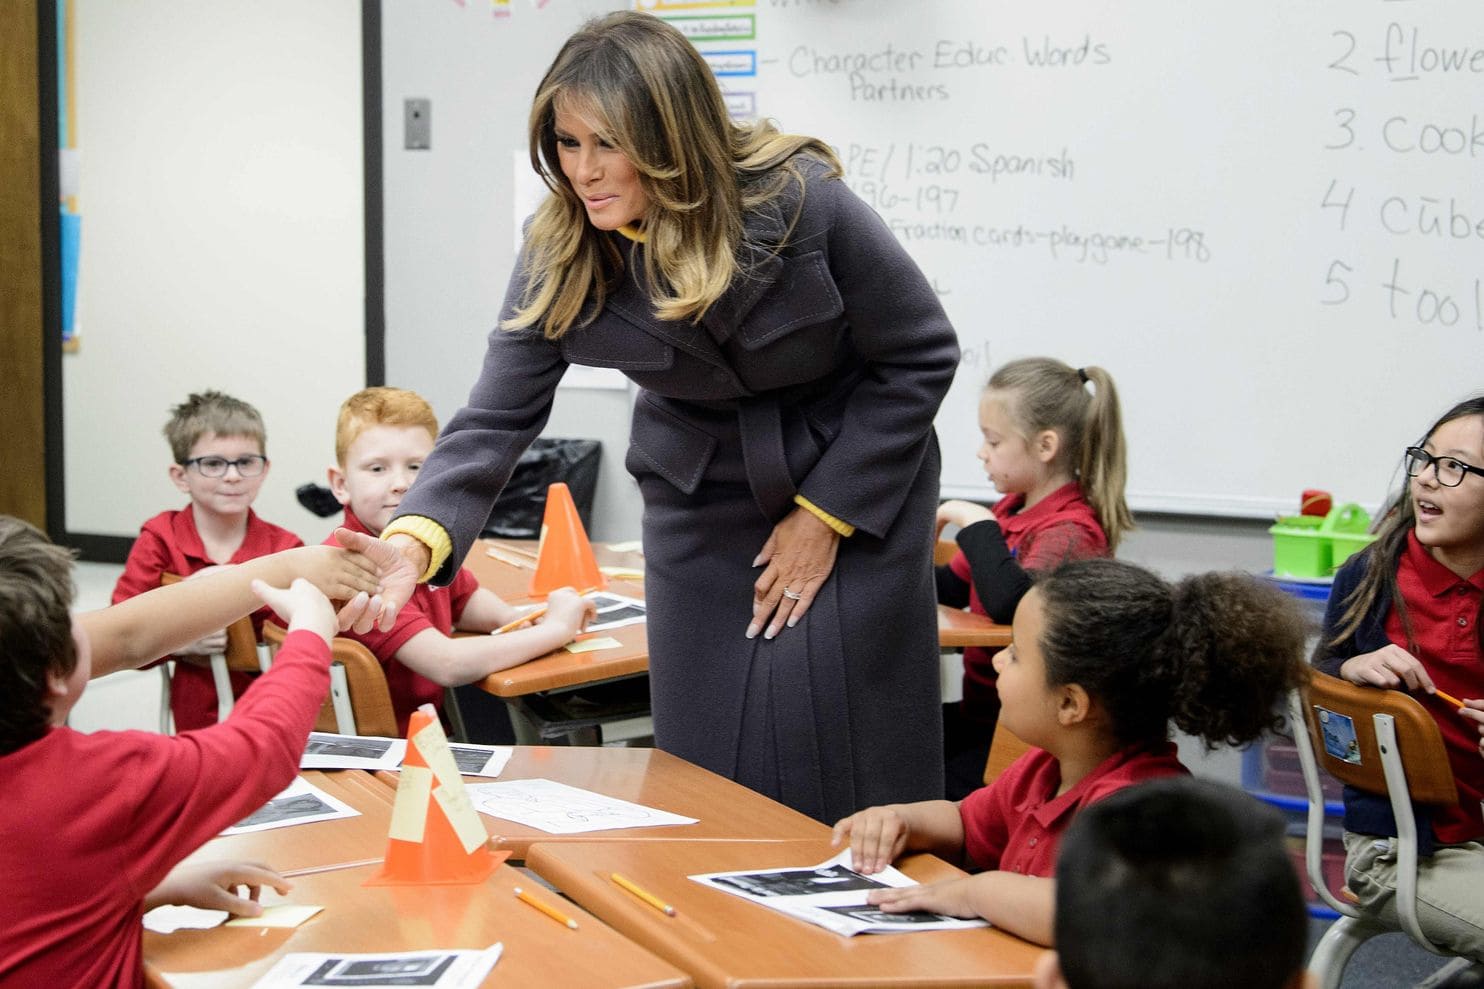 The first lady watched school kids coloring in Tulsa. The Turks saw links to terrorism 2